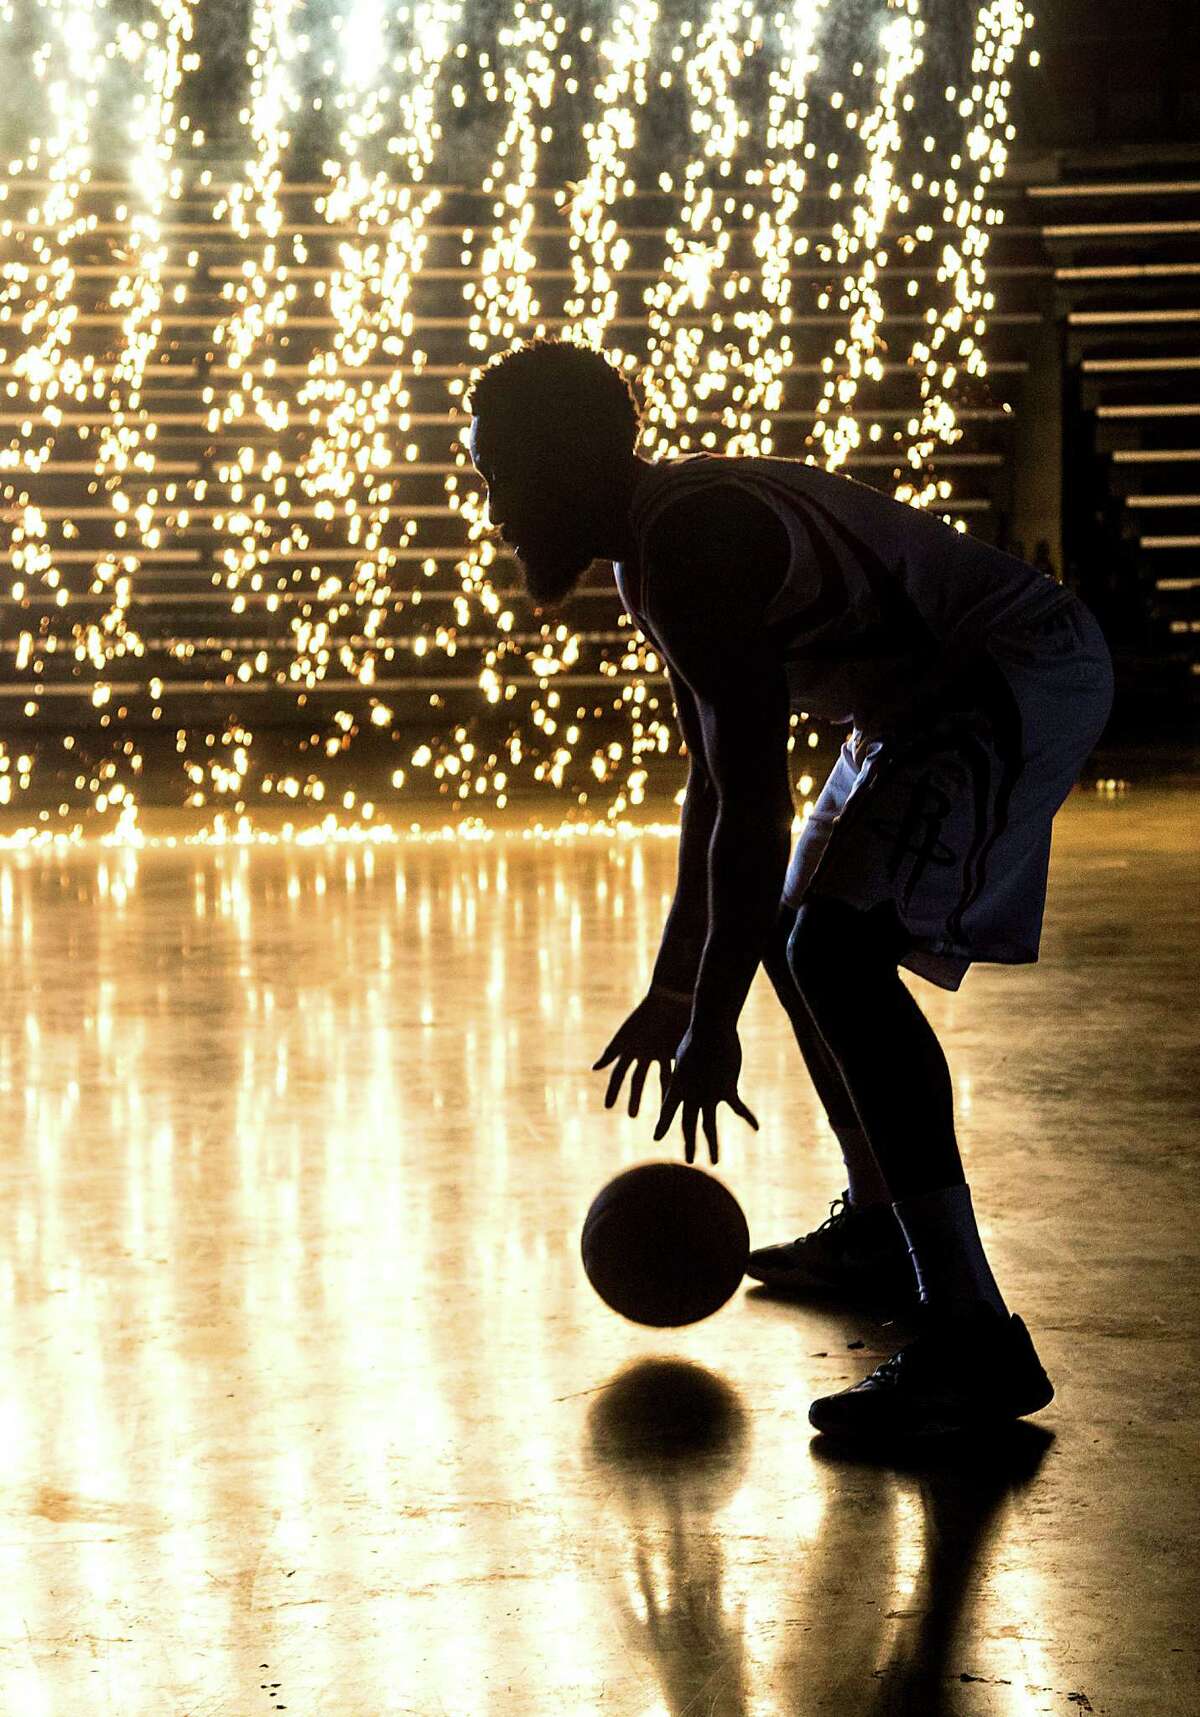 MVP runner-up James Harden, pictured during a September video shoot at Toyota Center, is among the NBA's brightest lights.